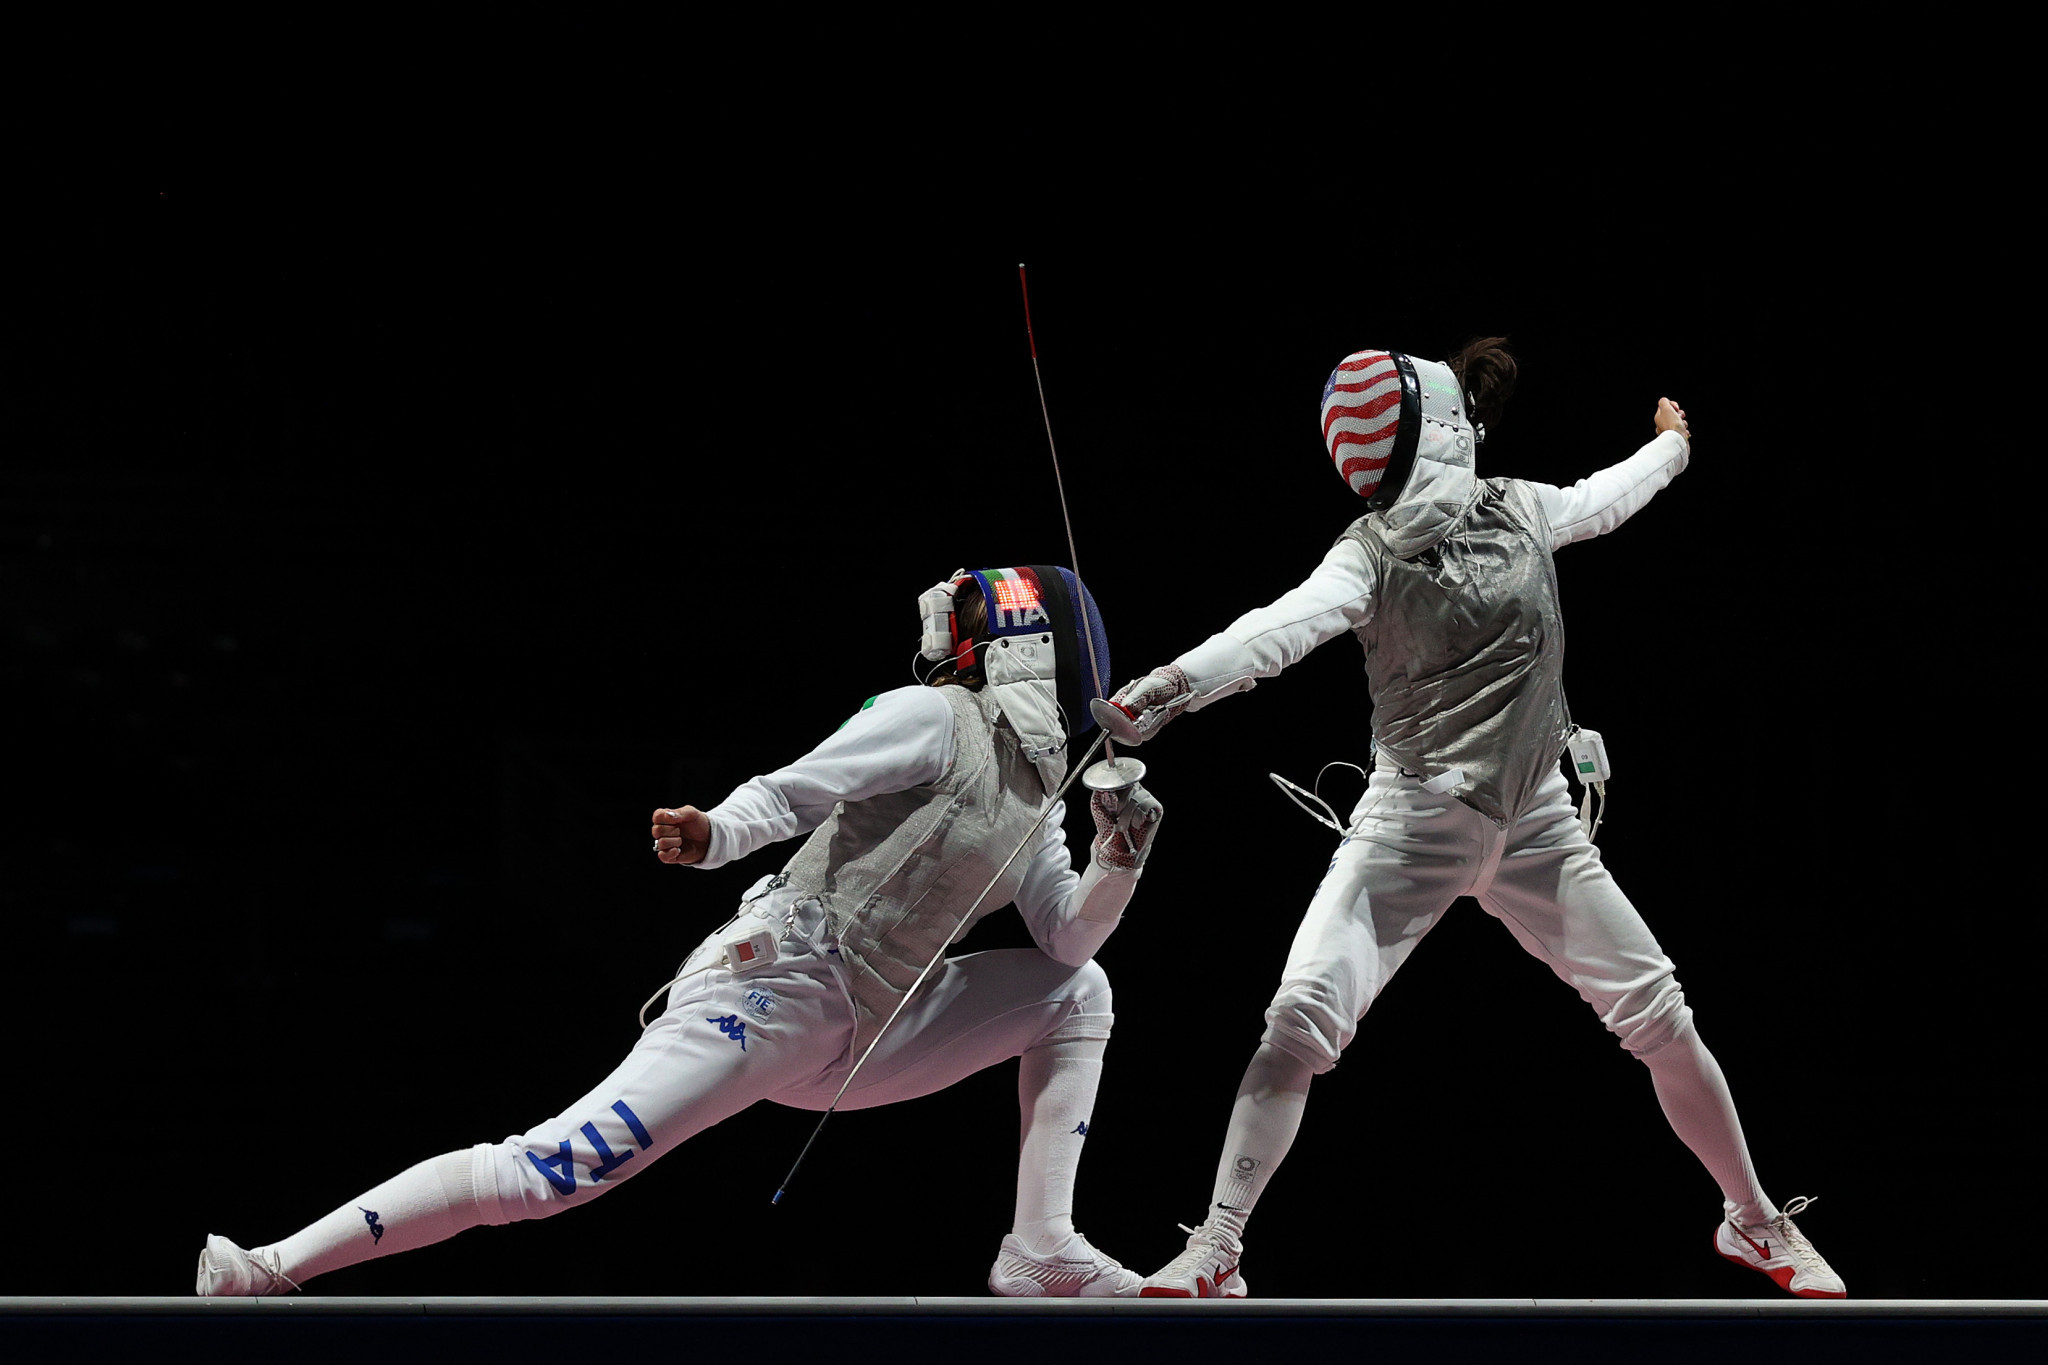 Lee Kiefer, right, won the United States' fourth Olympic gold medal in fencing at Tokyo 2020 ©Getty Images